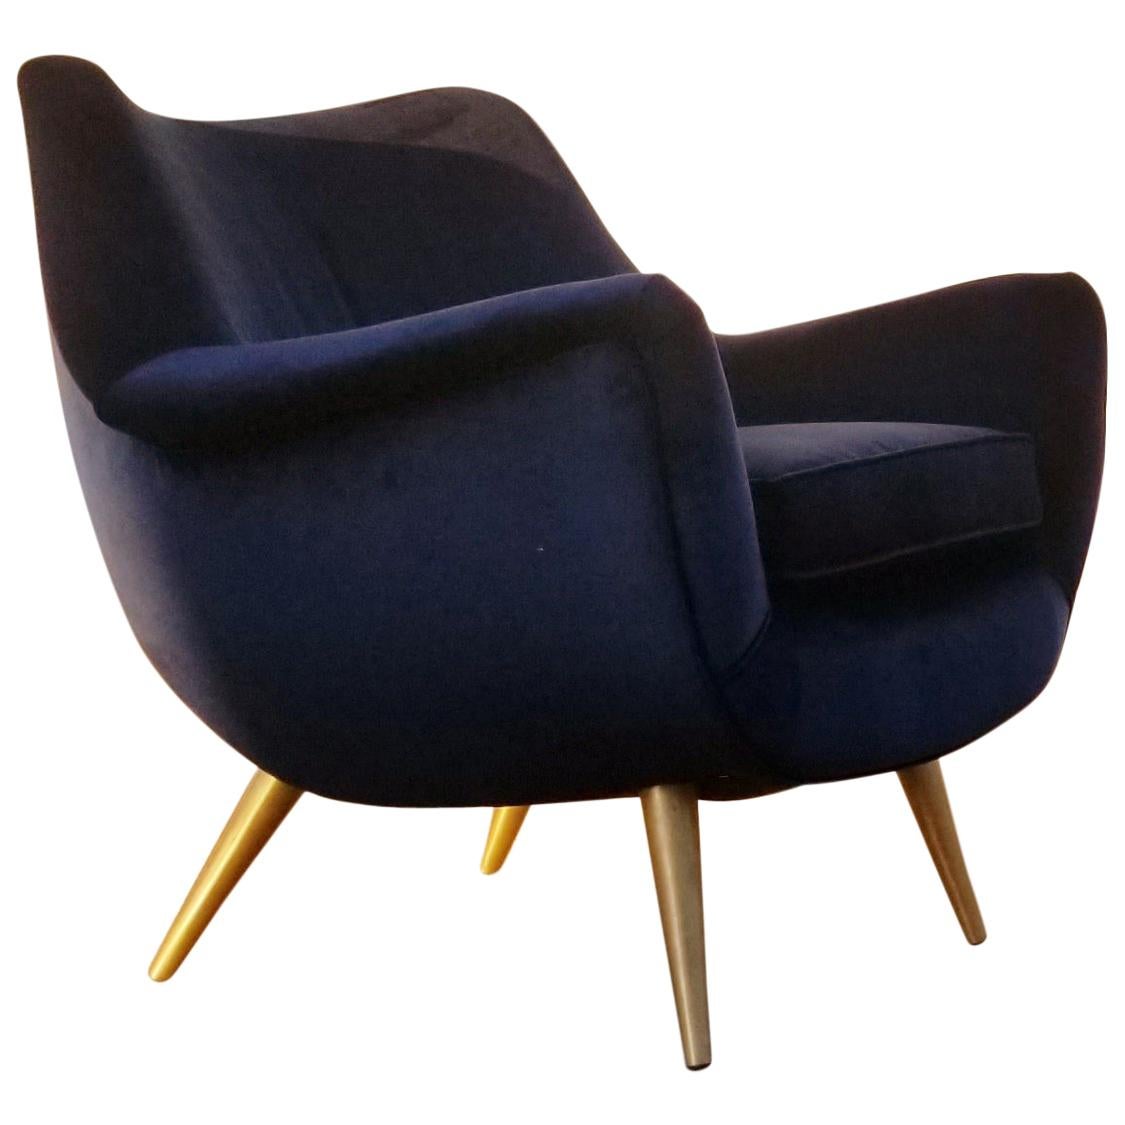 Sculptural Lounge Chair by Lawrence Peabody for Selig with Brass Legs